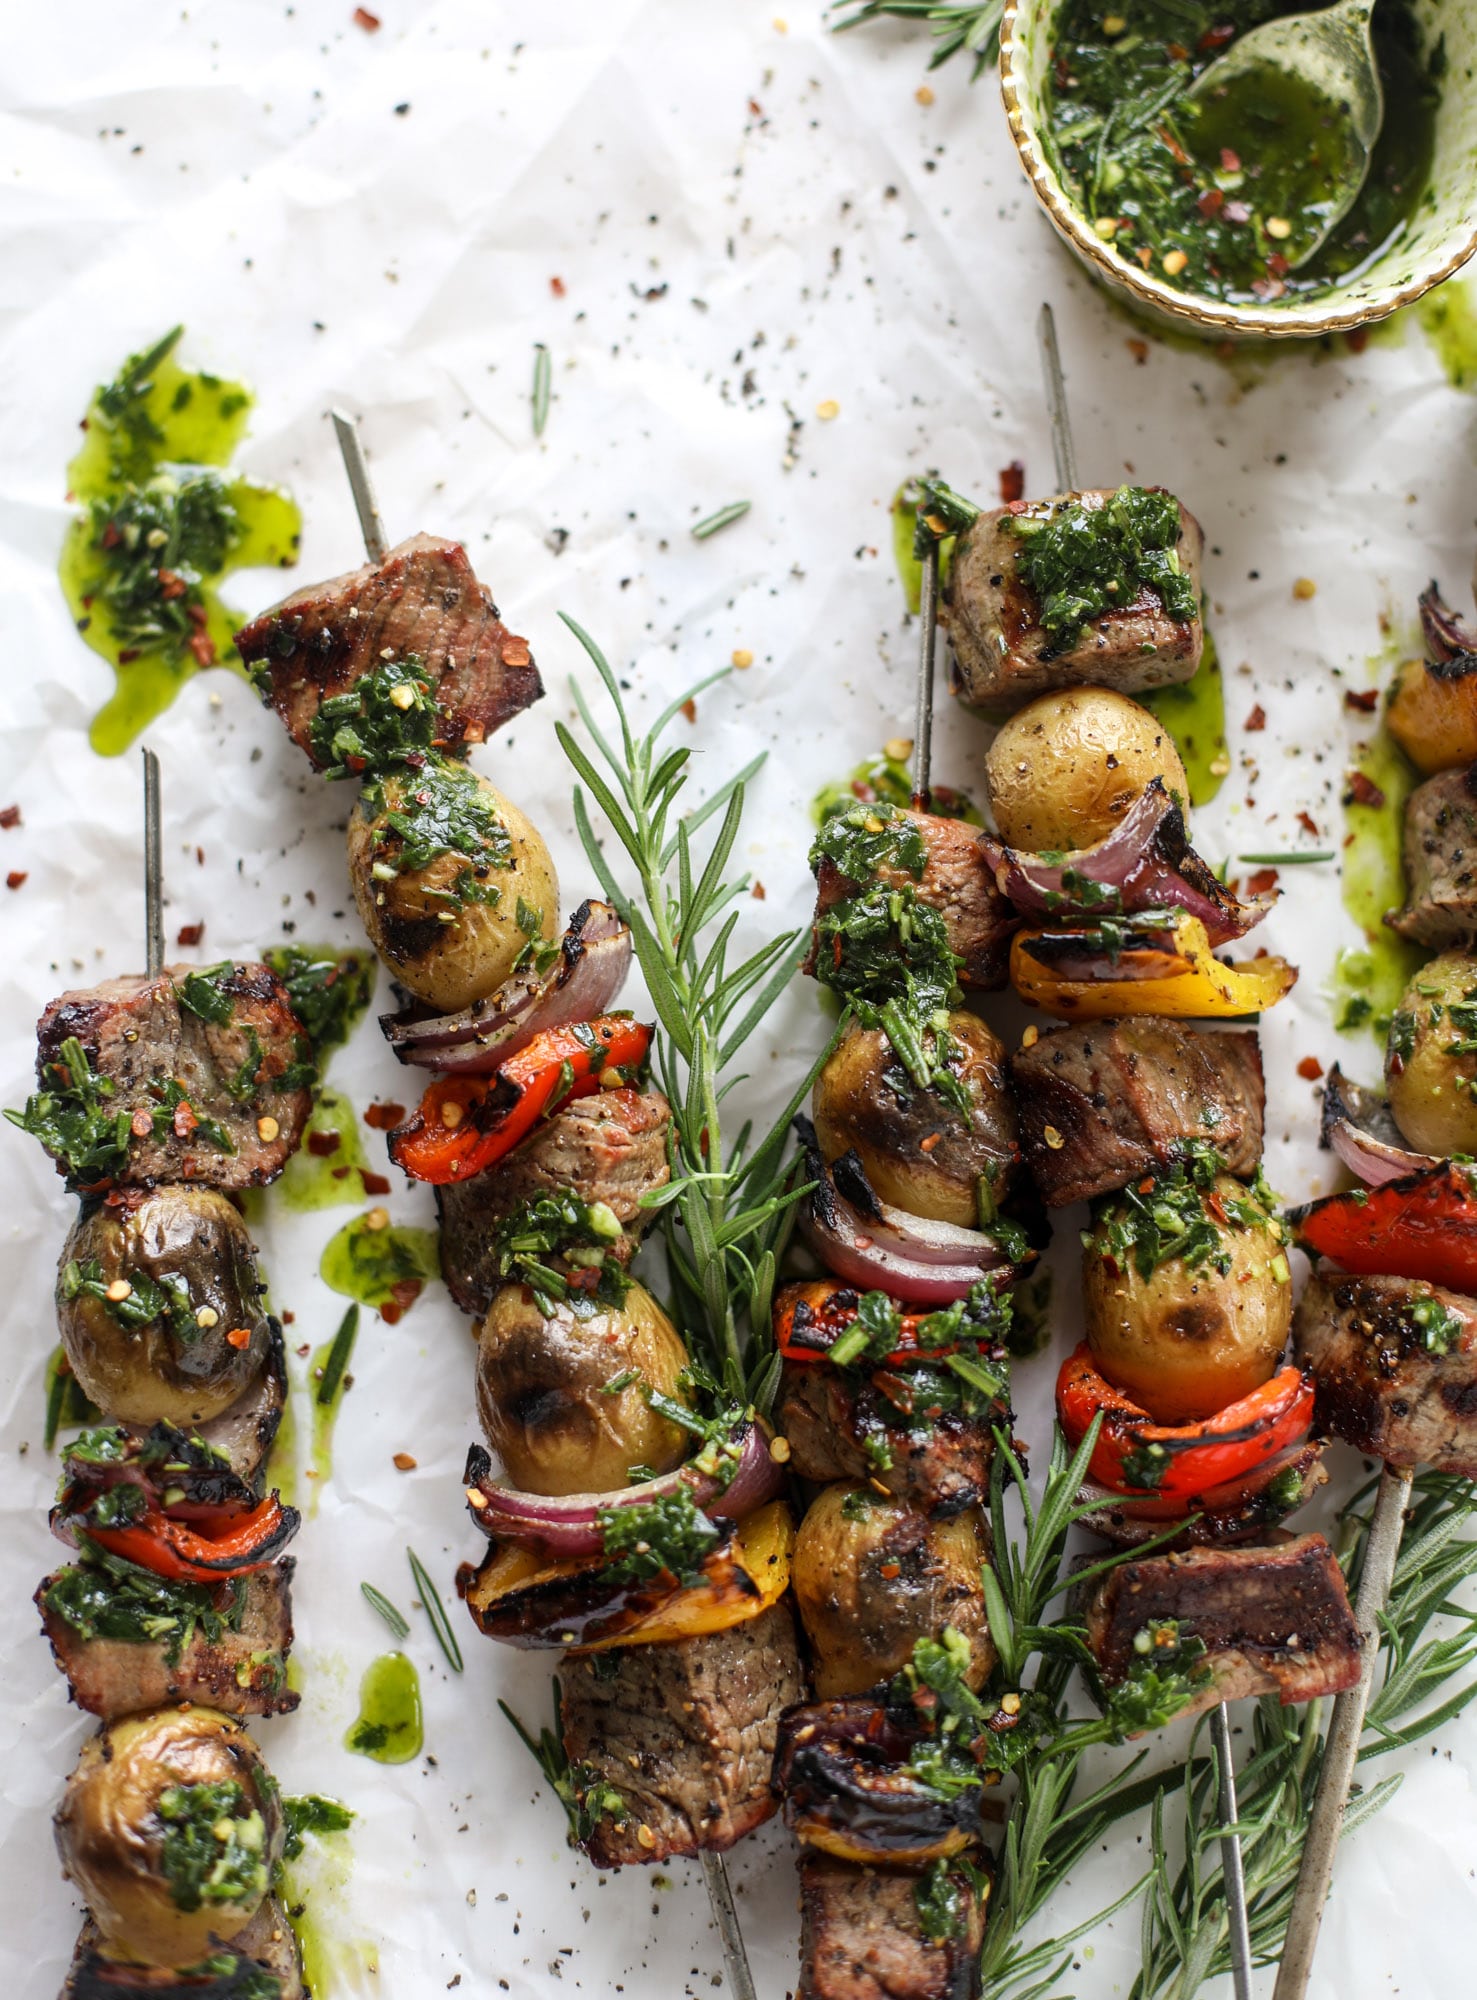 grilled filet and potato skewer